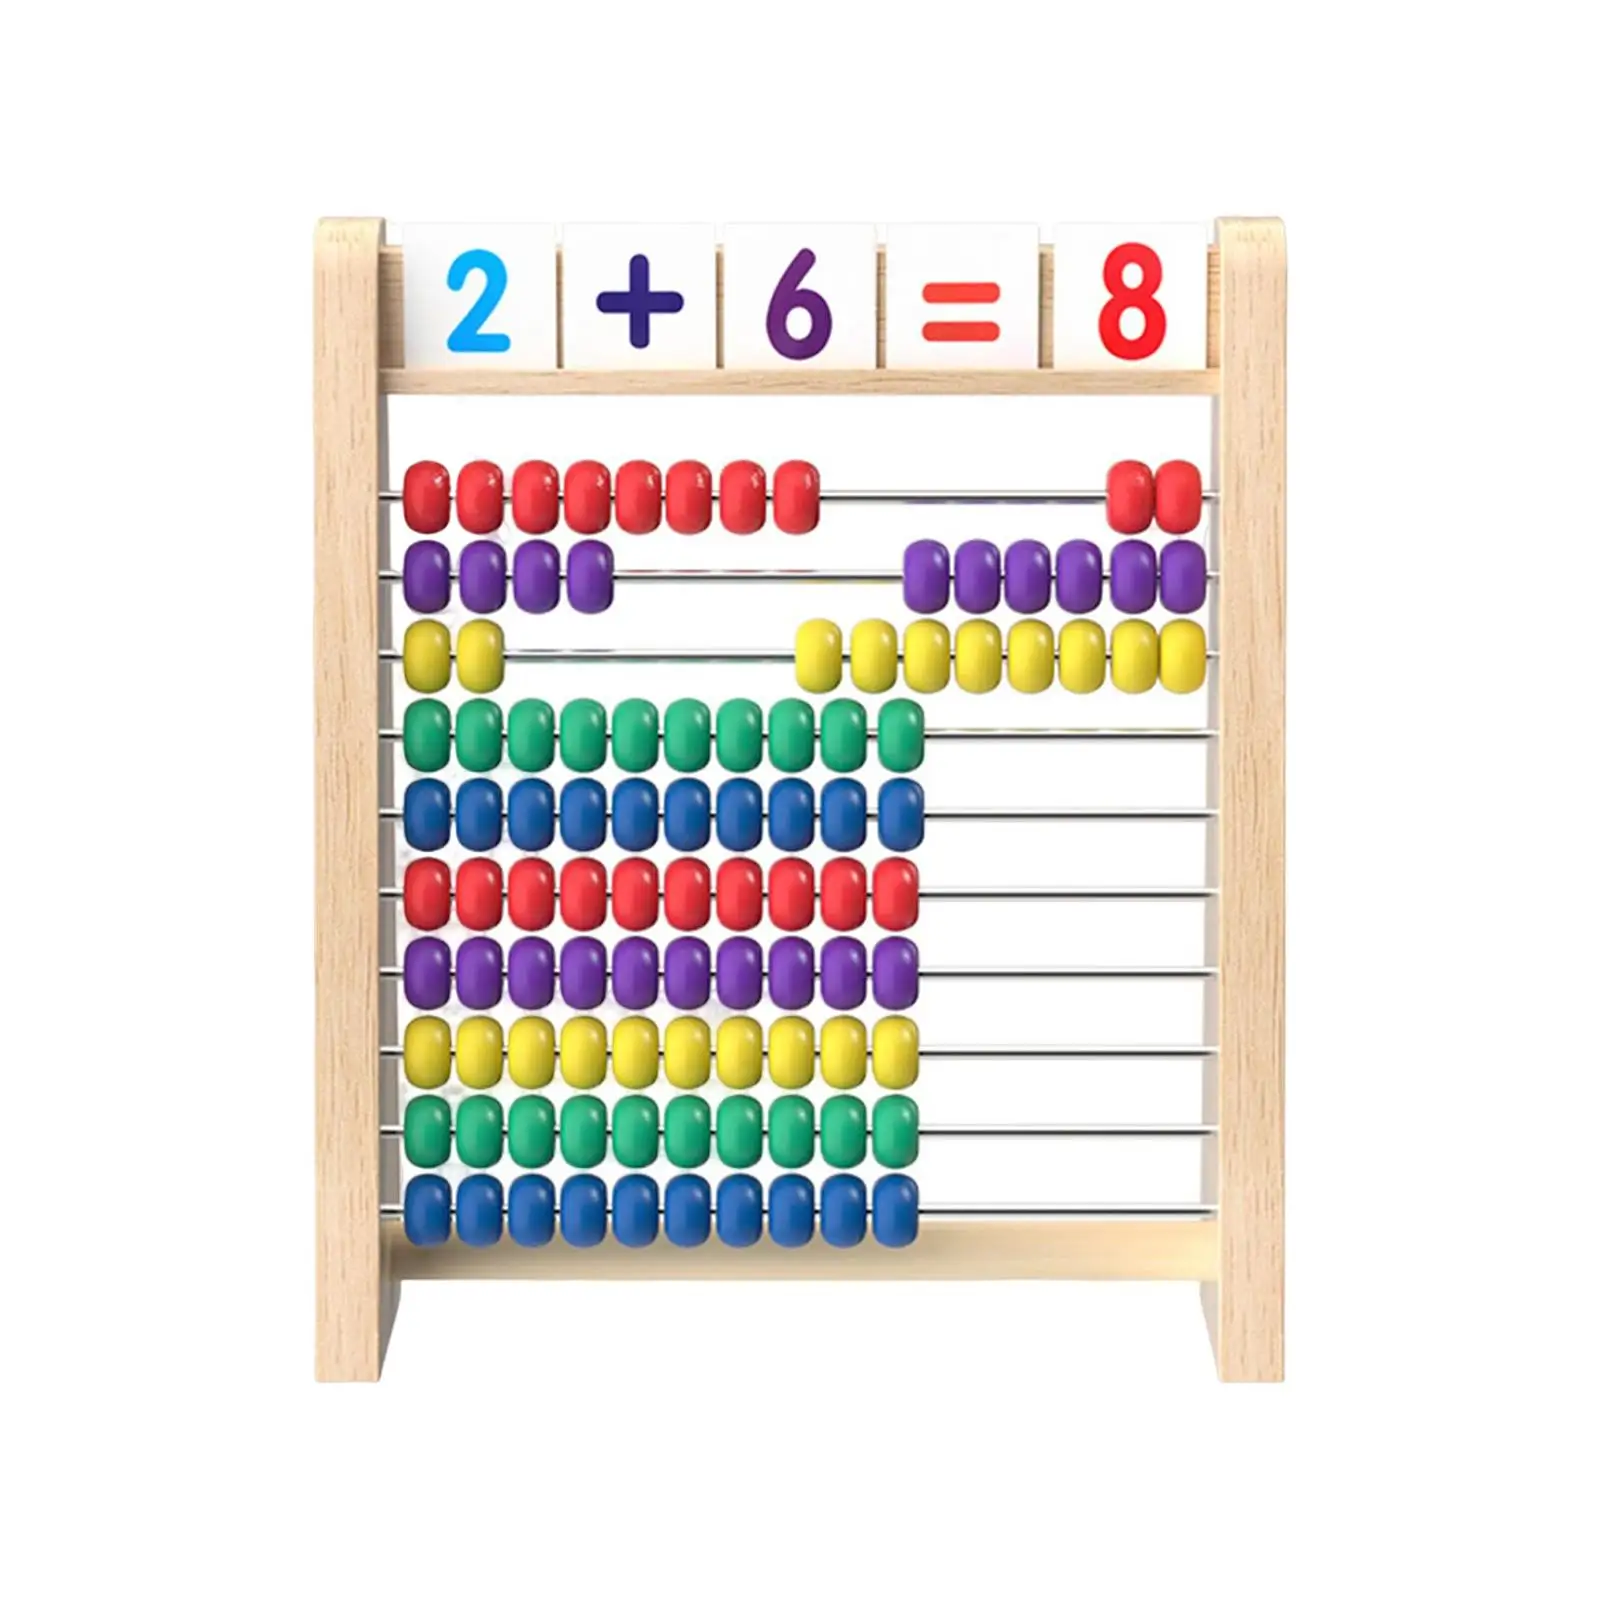 10 Row Math Learning Toys Educational Multicolor Beads Counting Counting Sticks Preschool Learning Toy for Activity Toys